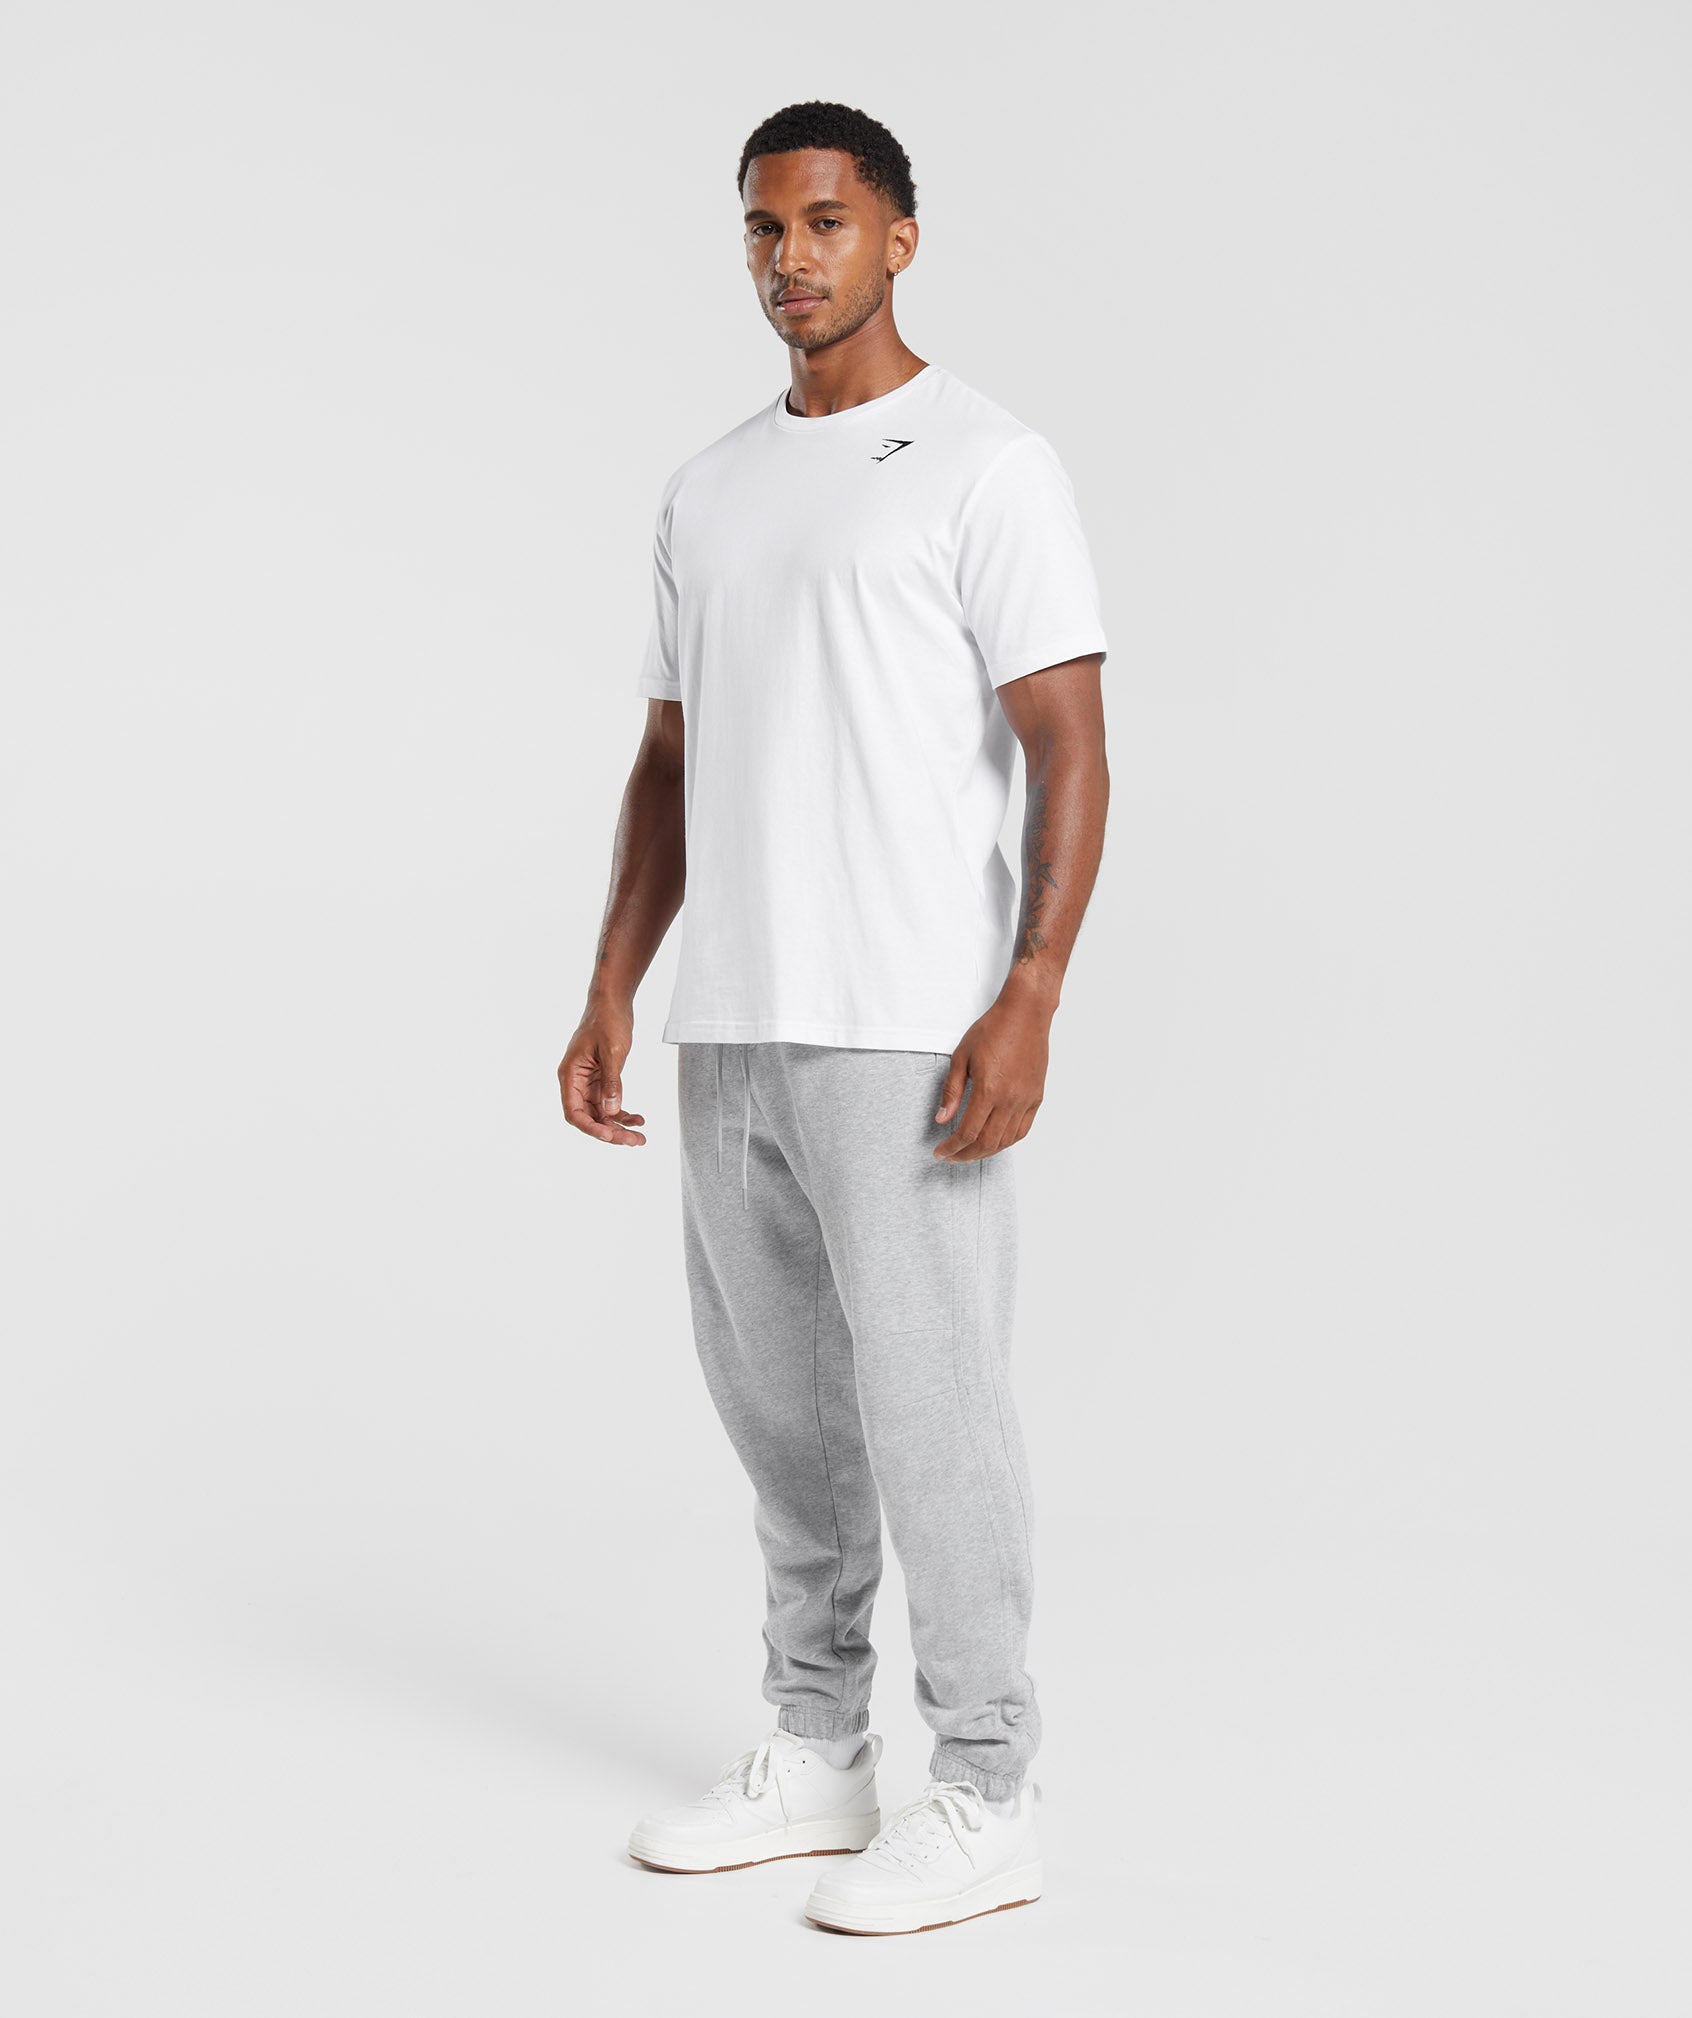 Rest Day Essentials Joggers in Light Grey Core Marl - view 4